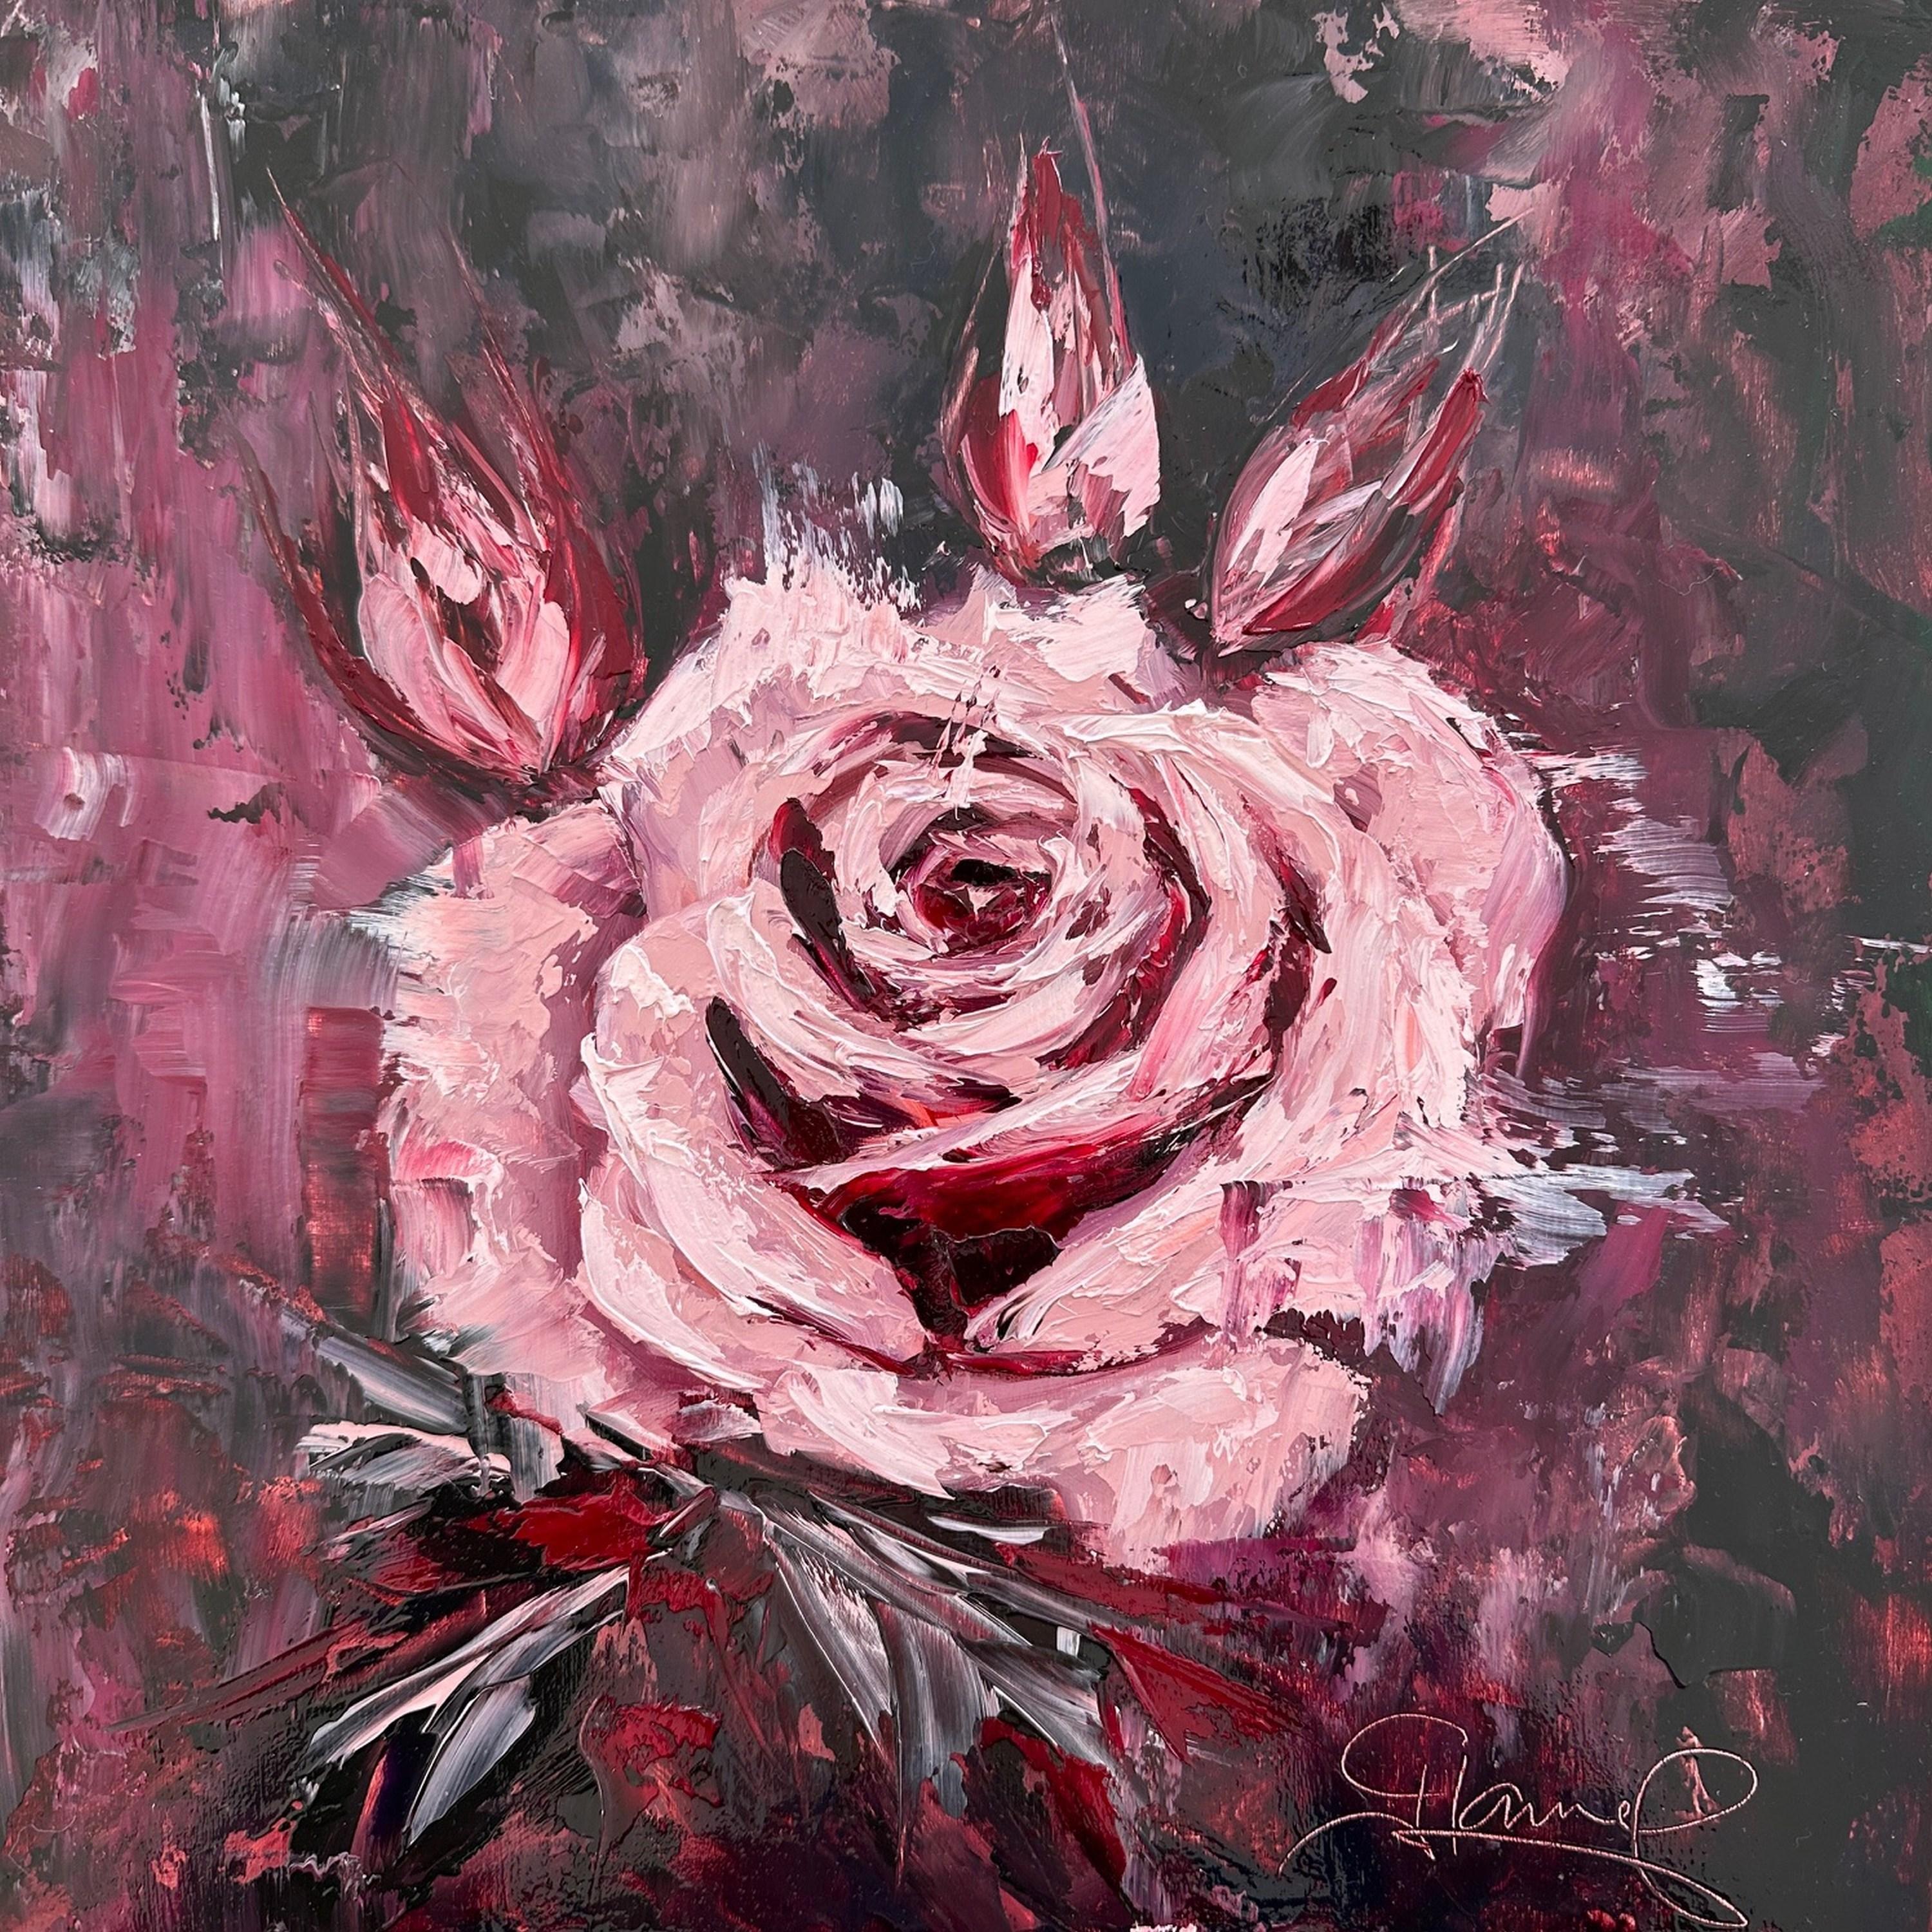 Genevieve Hamel
Mon Amour
Oil on Wood Panel
Year: 2024
Size: 12 x 12 x 1.625 inches
Signed by hand
COA provided
Ref.: 924802-2091

Gorgeous, generous, sumptuous, and velvety, this rose, in all her splendor, reflects a copious amount of love! The